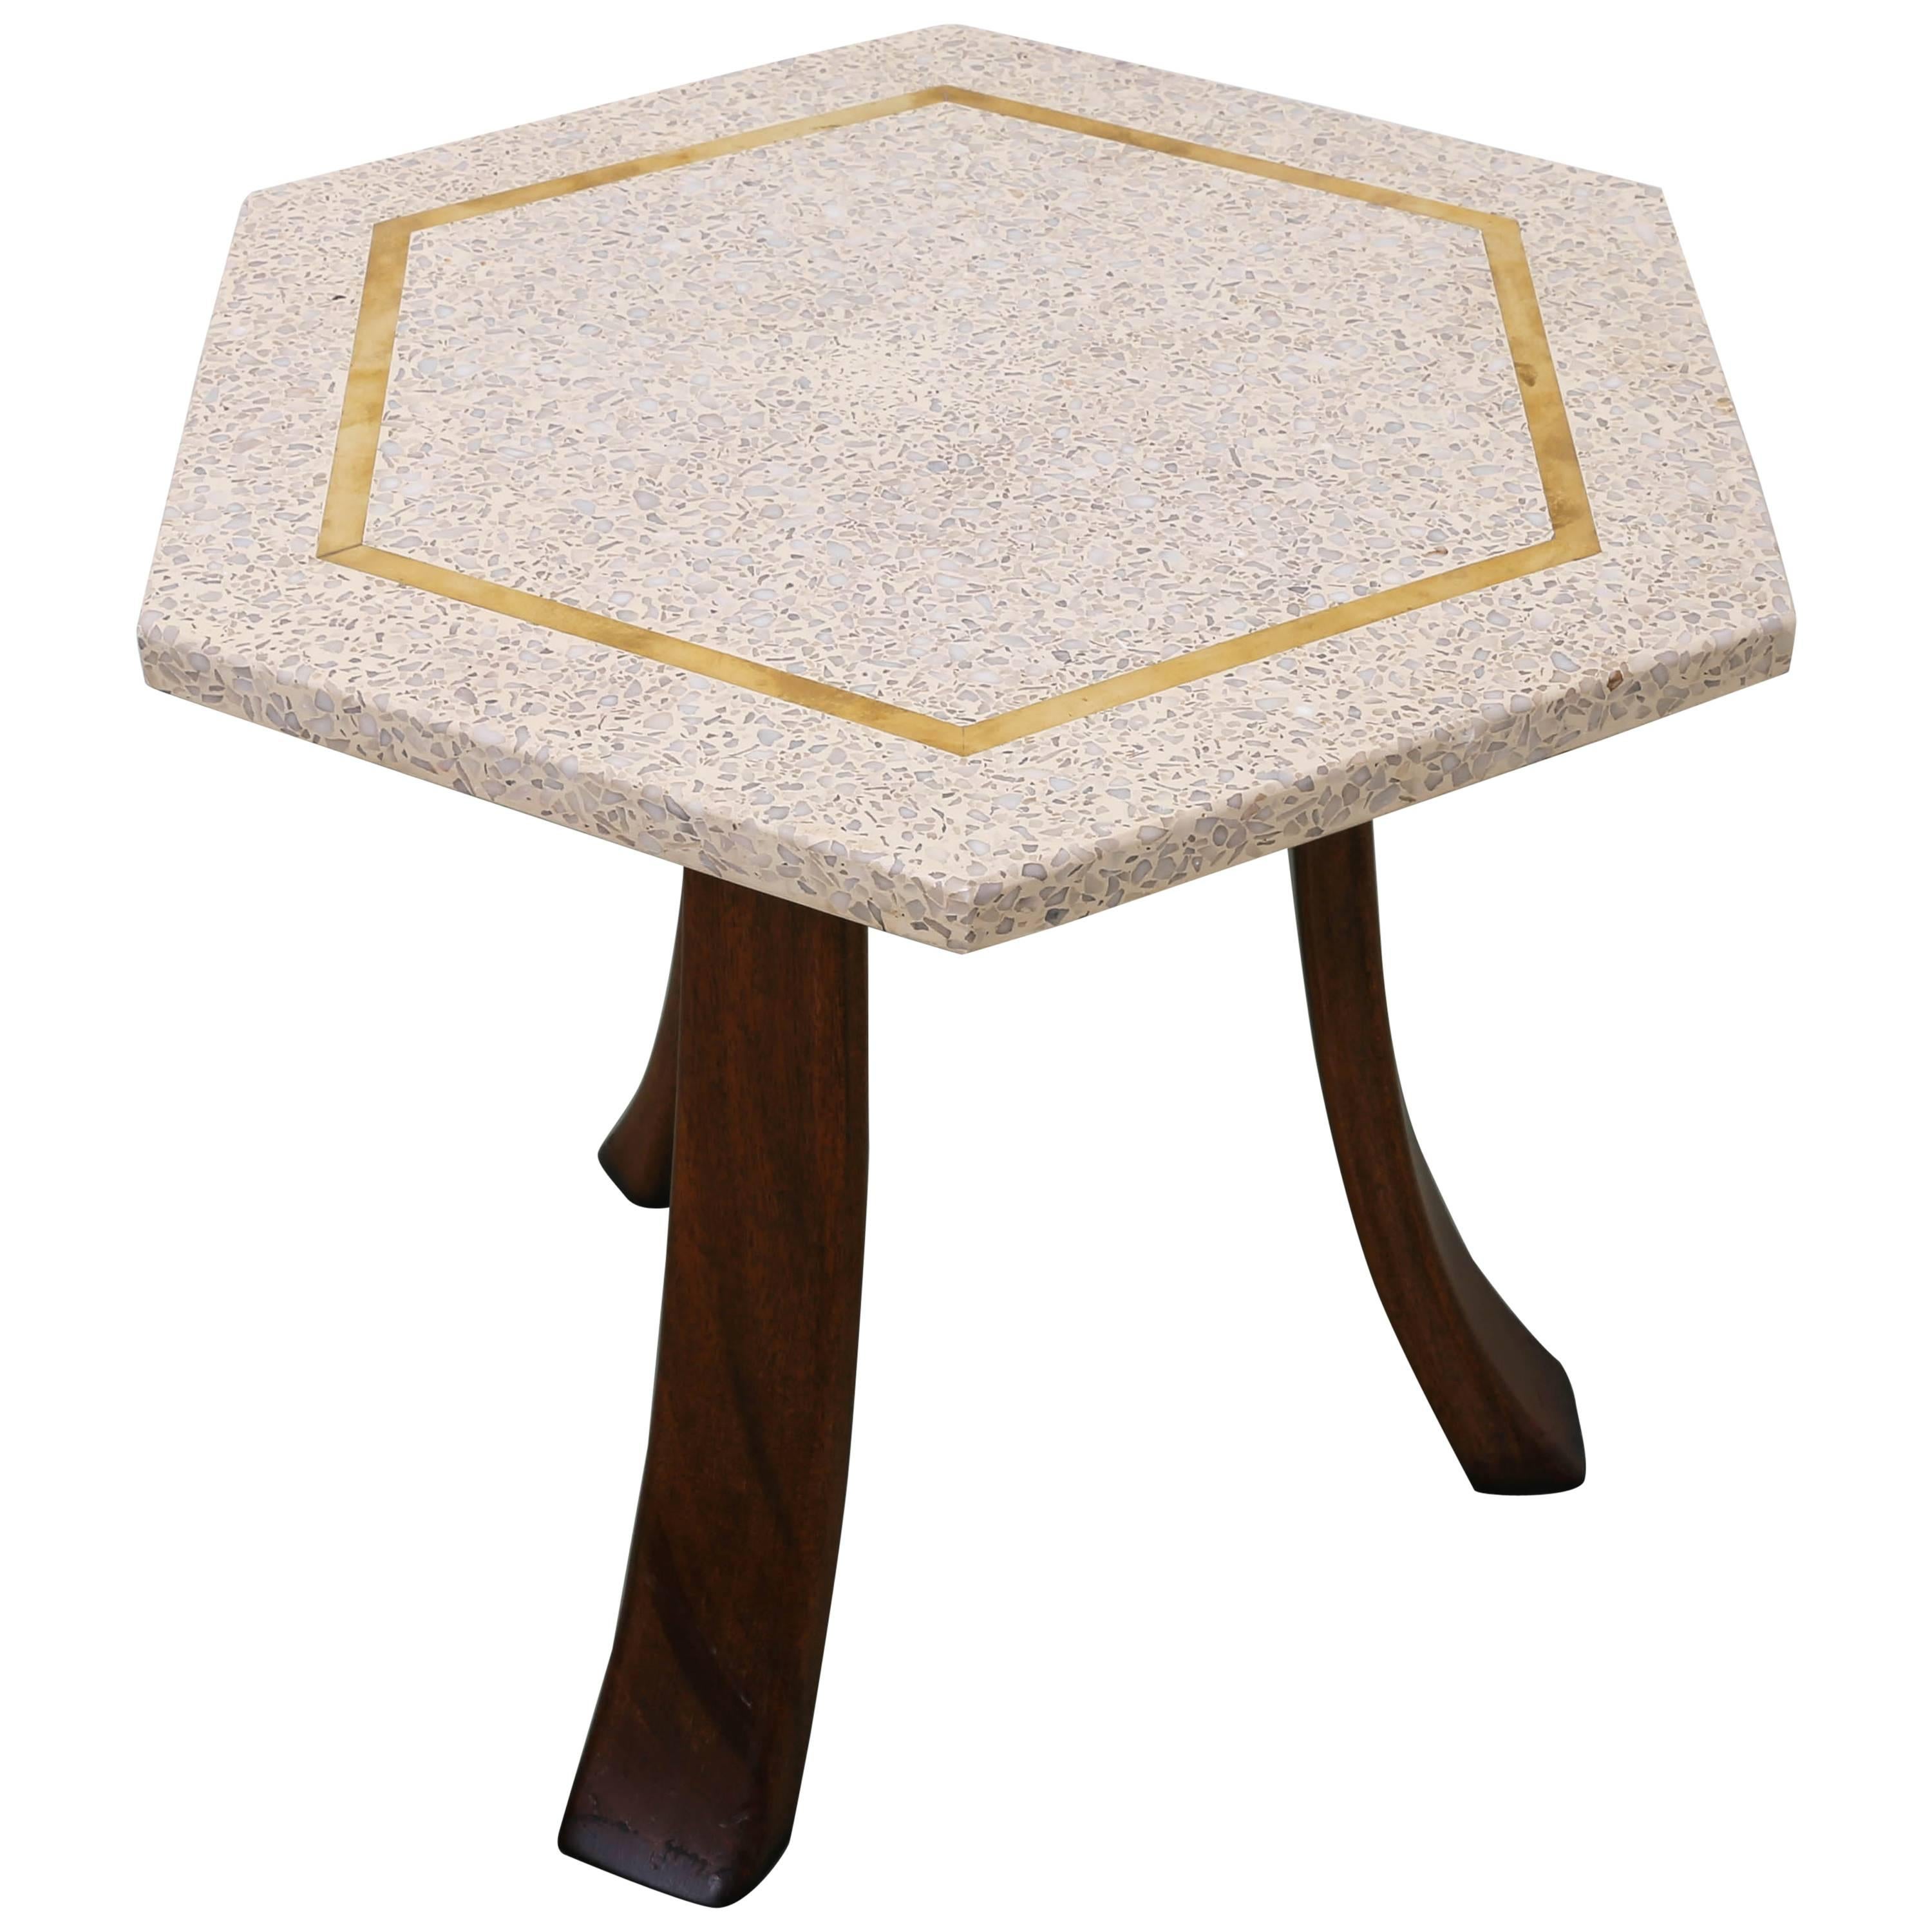 Hexagonal Terrazzo with Brass Inlaid Side Table by Harvey Probber